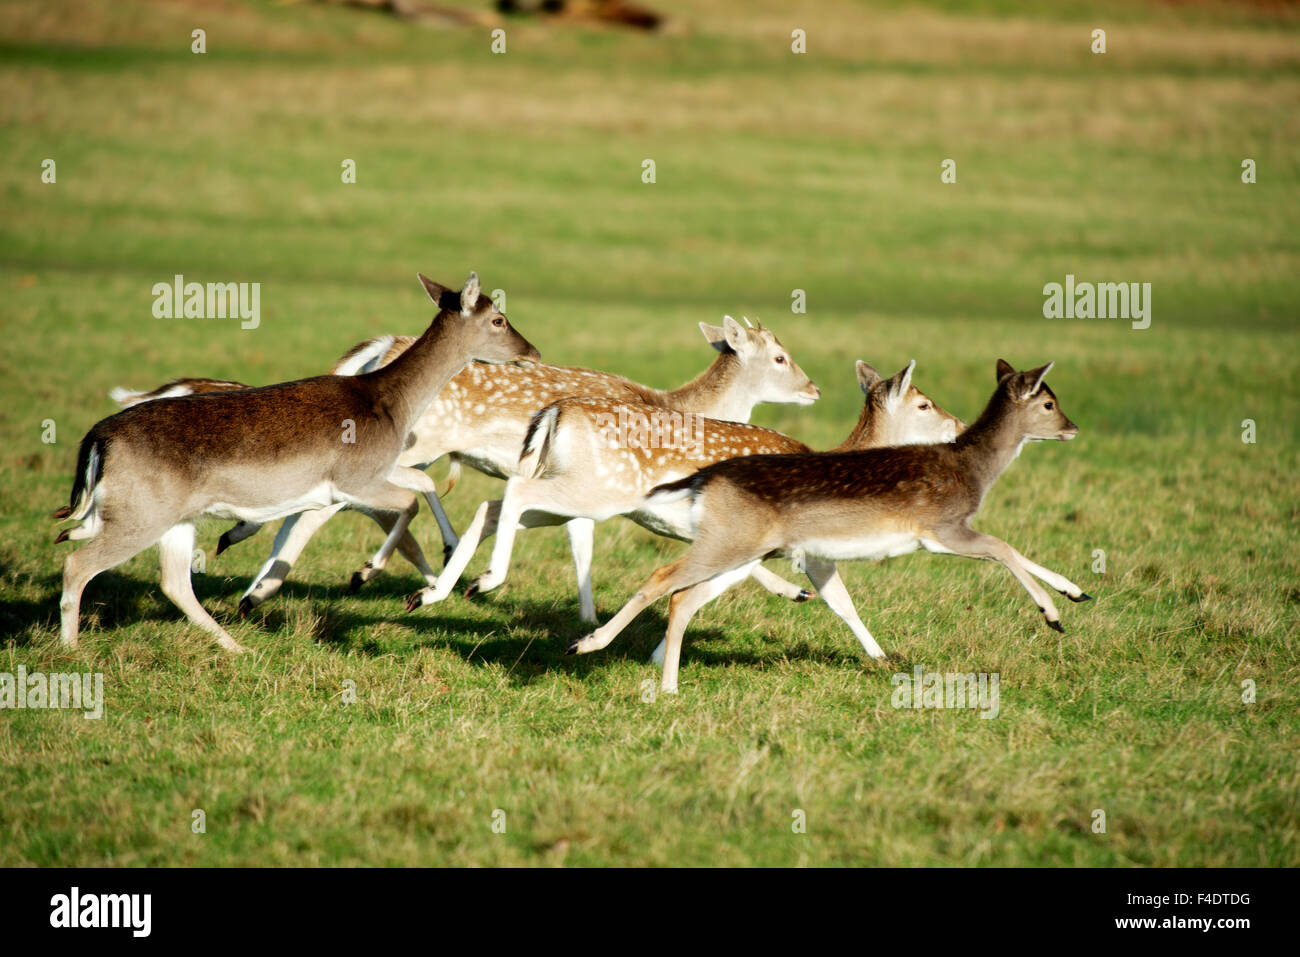 Fallow deer grazing in Richmond Park, London, UK. Fallow deer, an introduced species of ungulate, can be found in many parks in the UK, such as Richmond Park in the heart of London. (Large format sizes available) Stock Photo